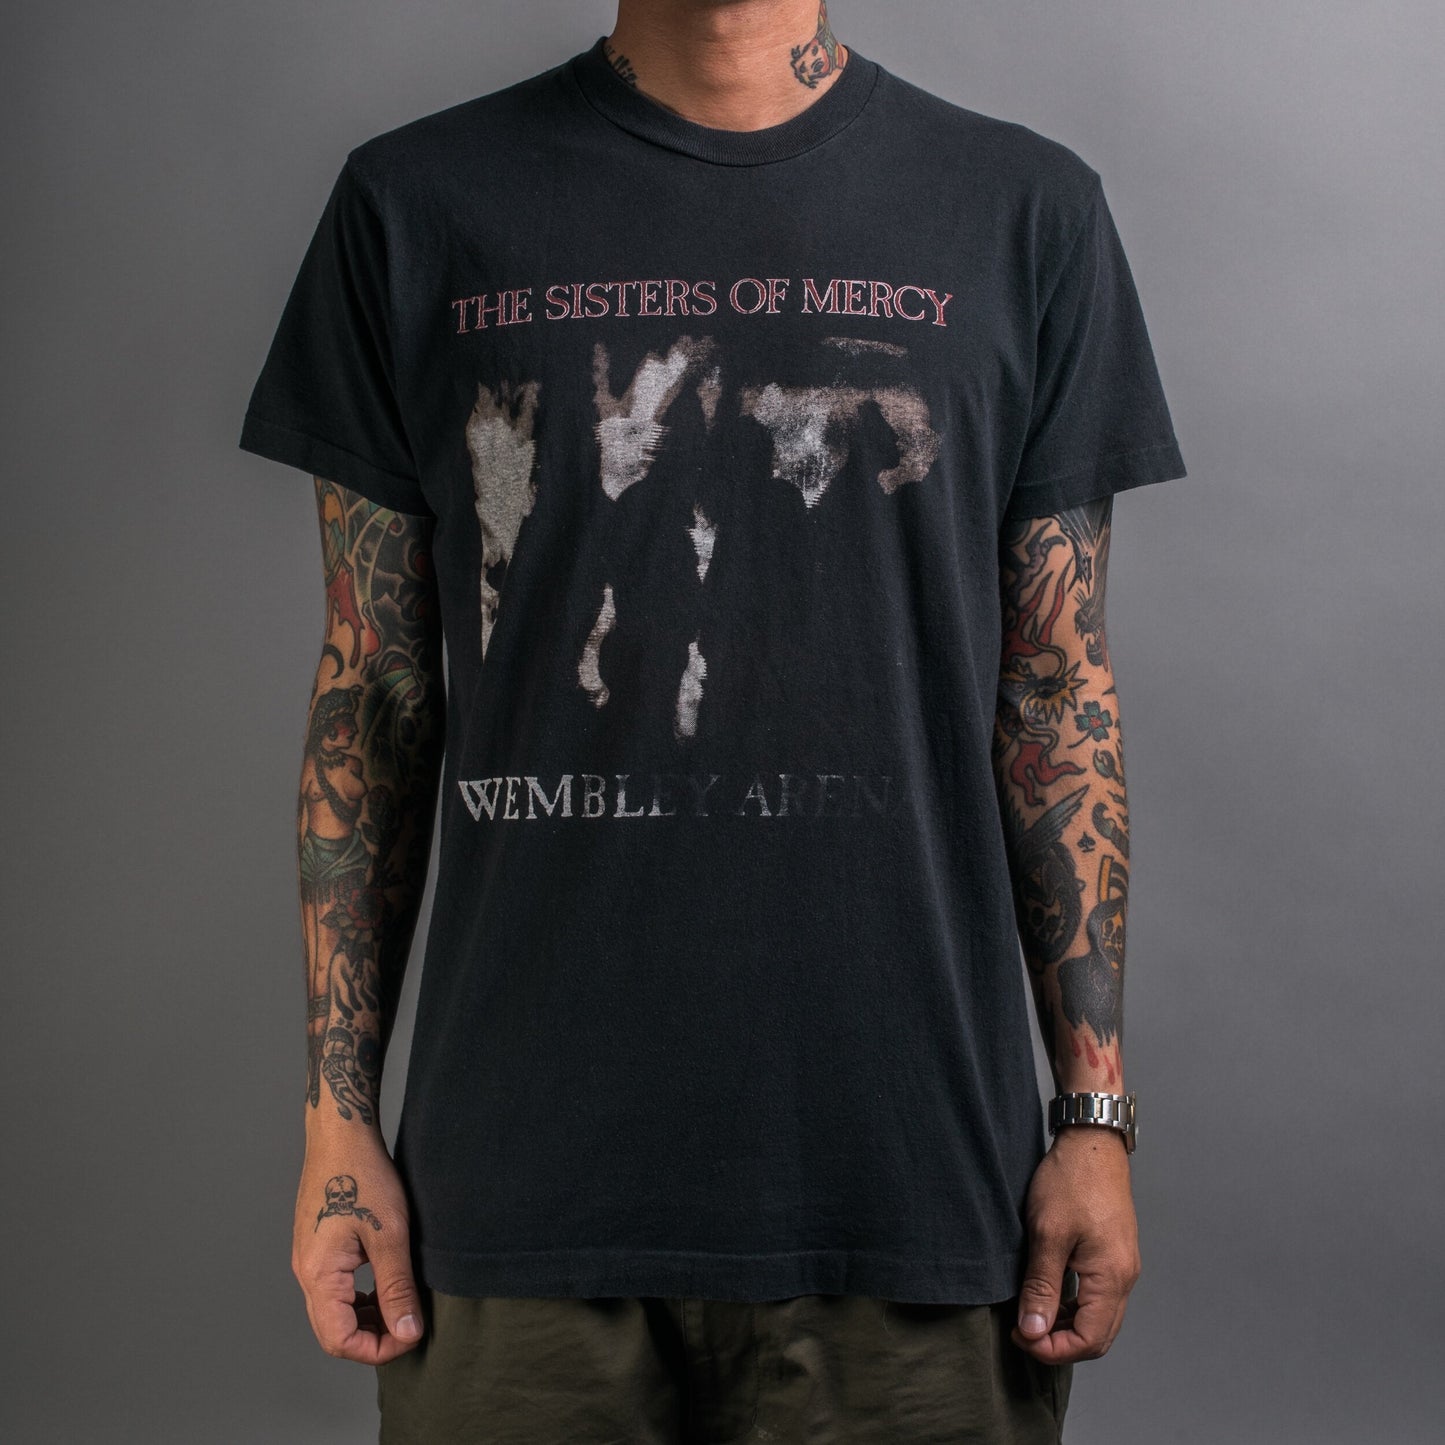 Vintage 1990 The Sisters Of Mercy Vision Thing Wembley Arena T-Shirt